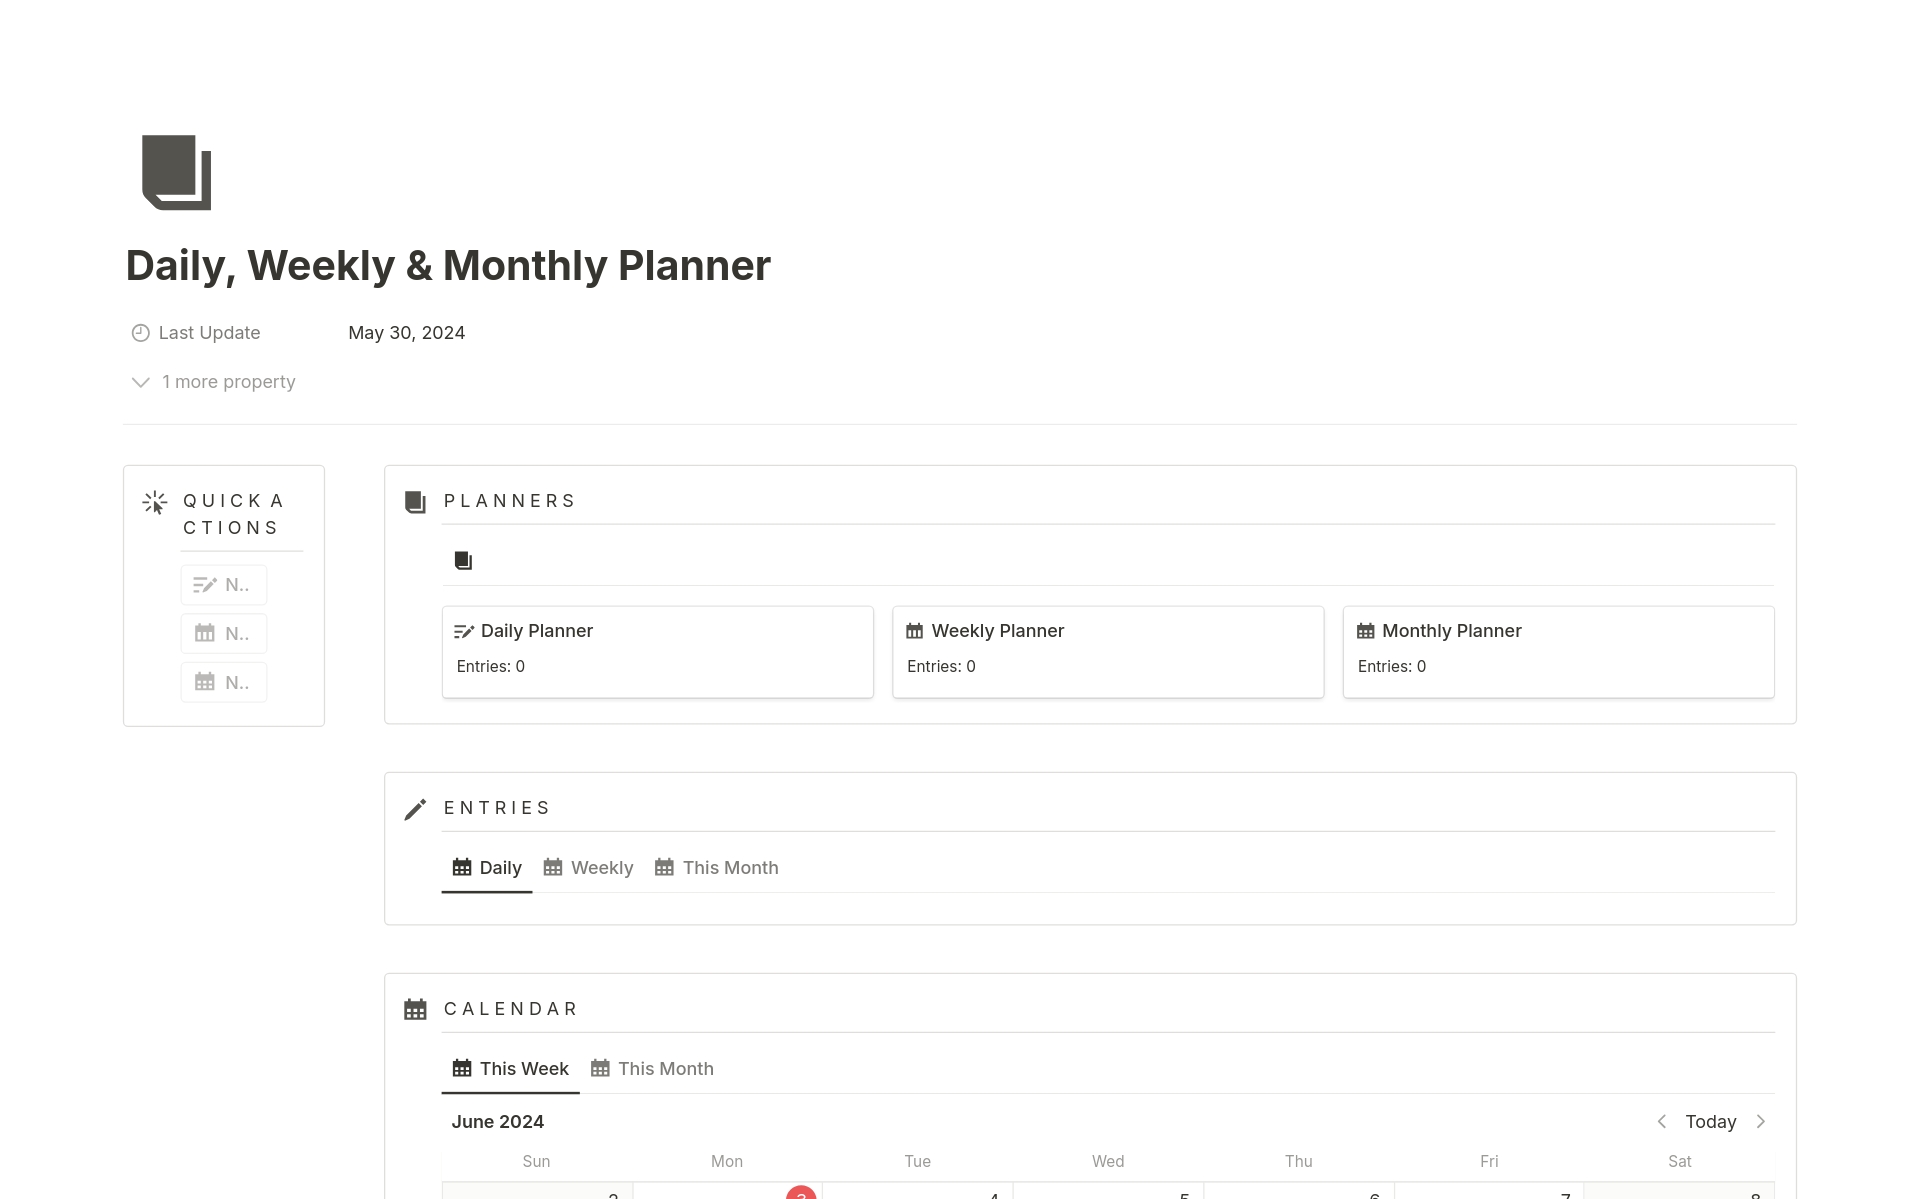 Daily, Weekly & Monthly Plannersのテンプレートのプレビュー